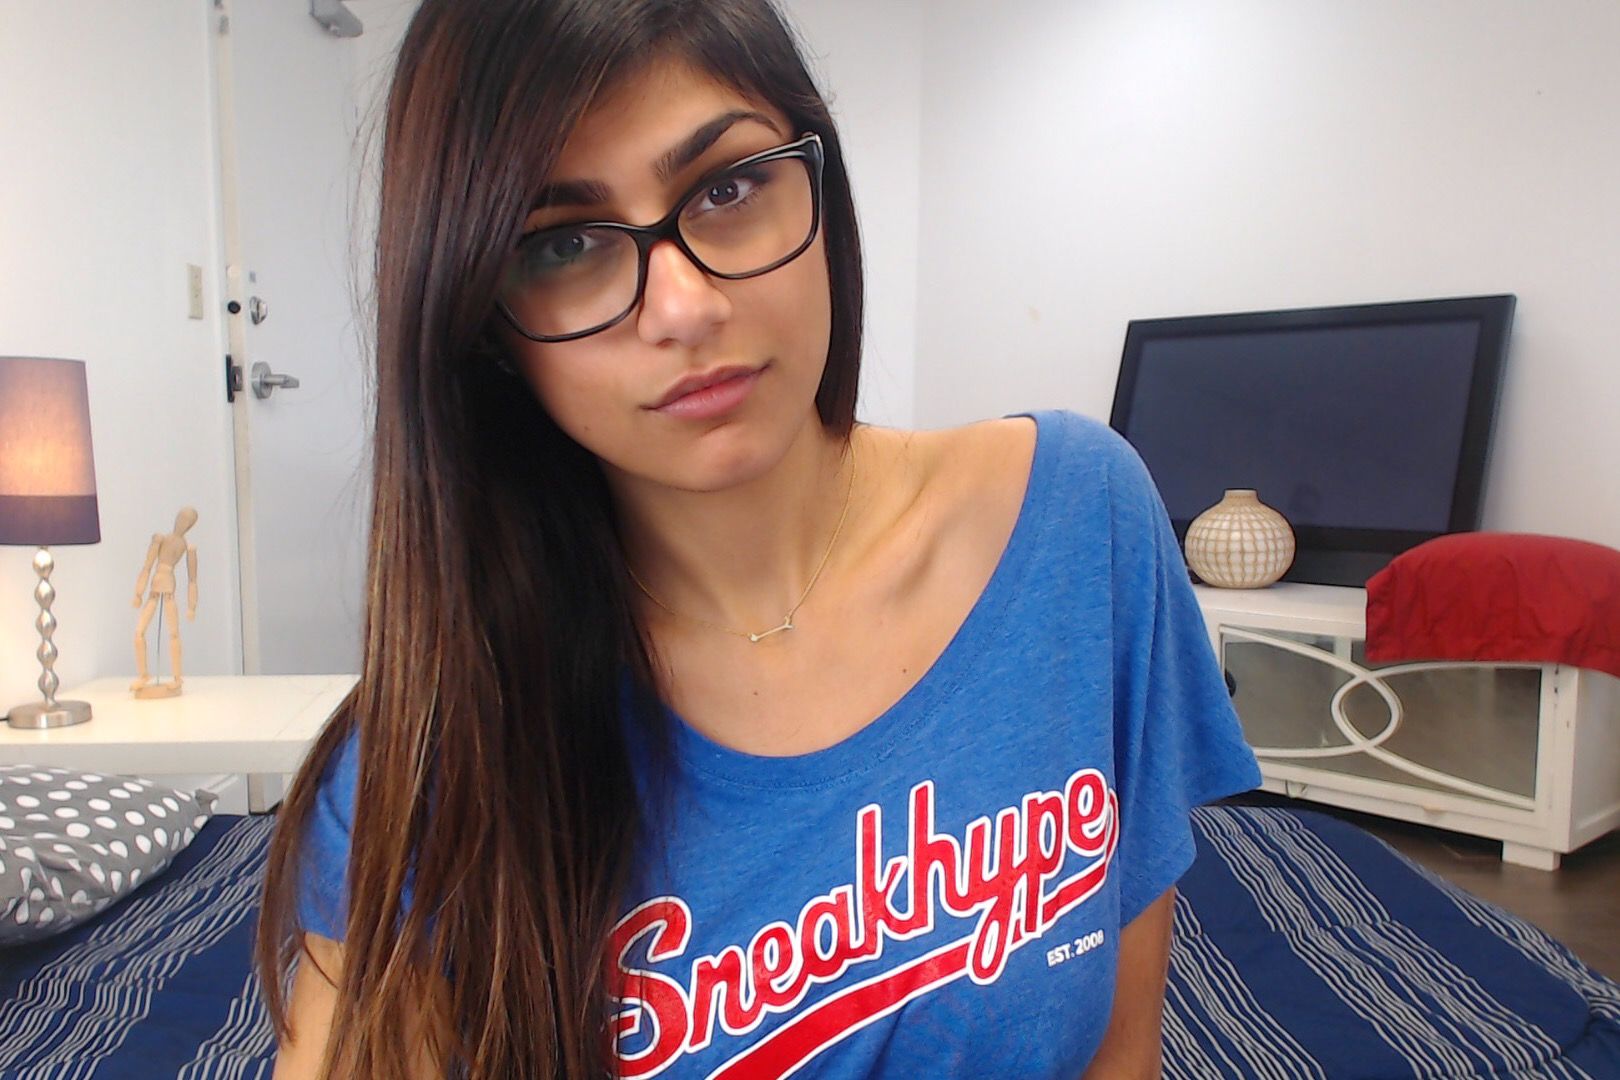 Where will you be able to watch Mia Khalifa's XXX content now? â€“ Film Daily